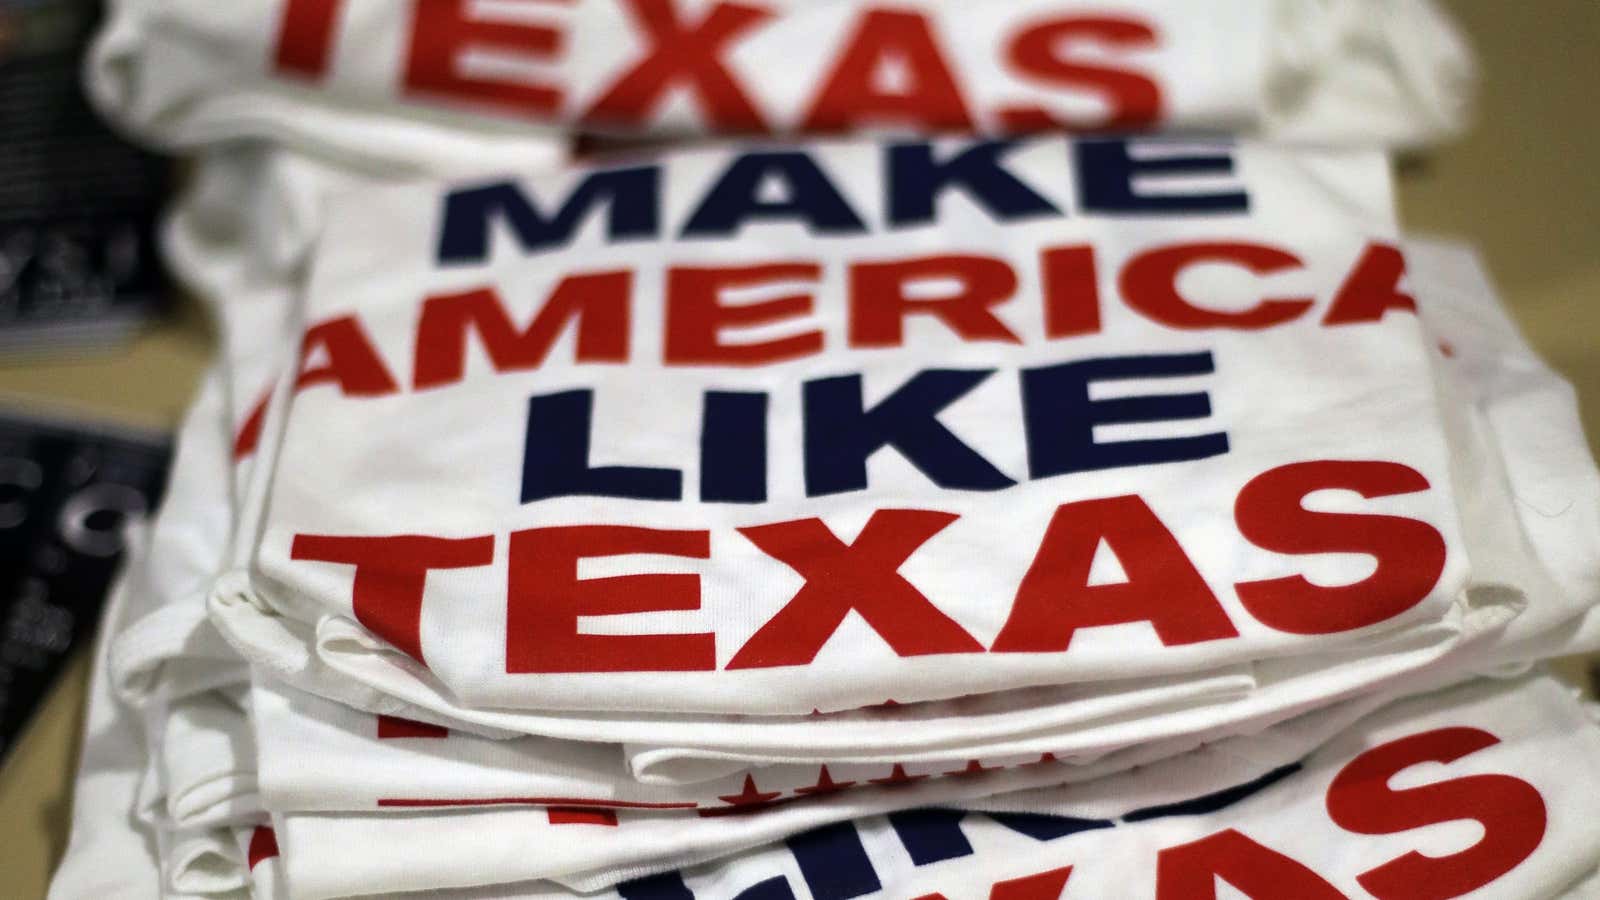 Texas is holding the US’s first 2018 primary elections Tuesday.